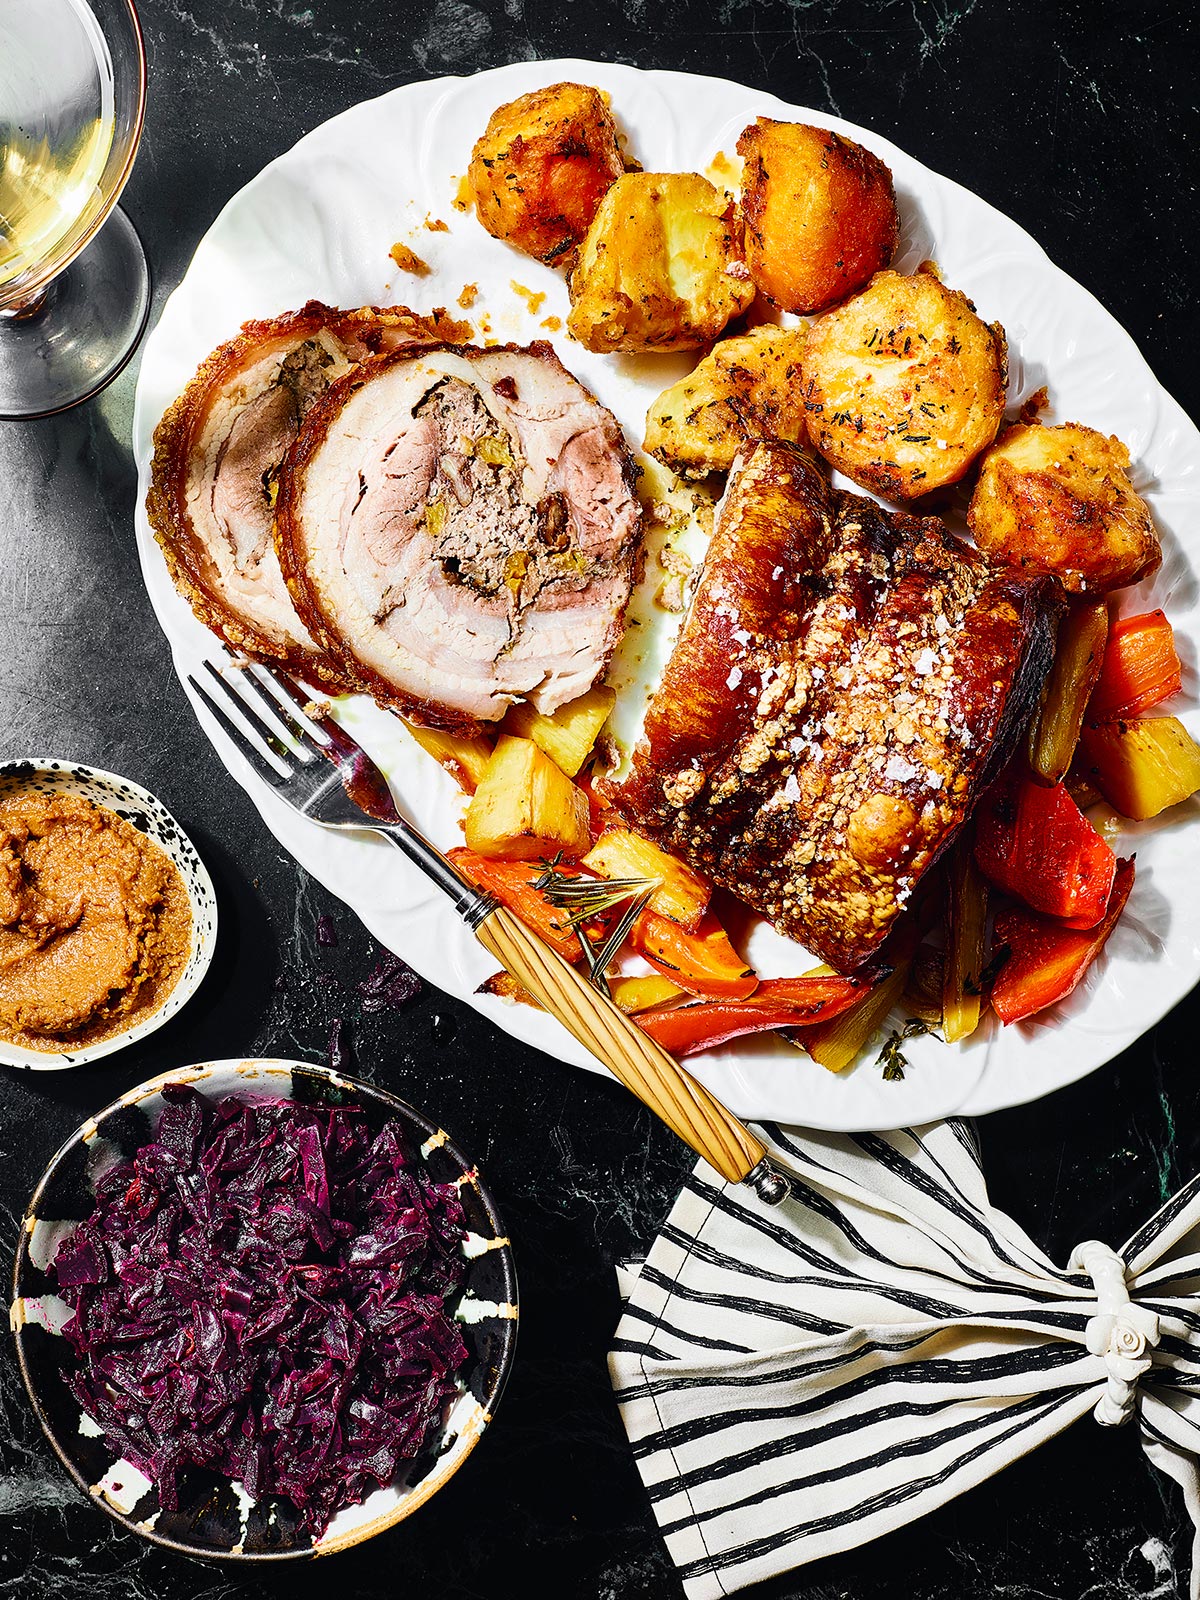 The Roast Dinner Collection - Porchetta Stuffed with Fennel and Apricots